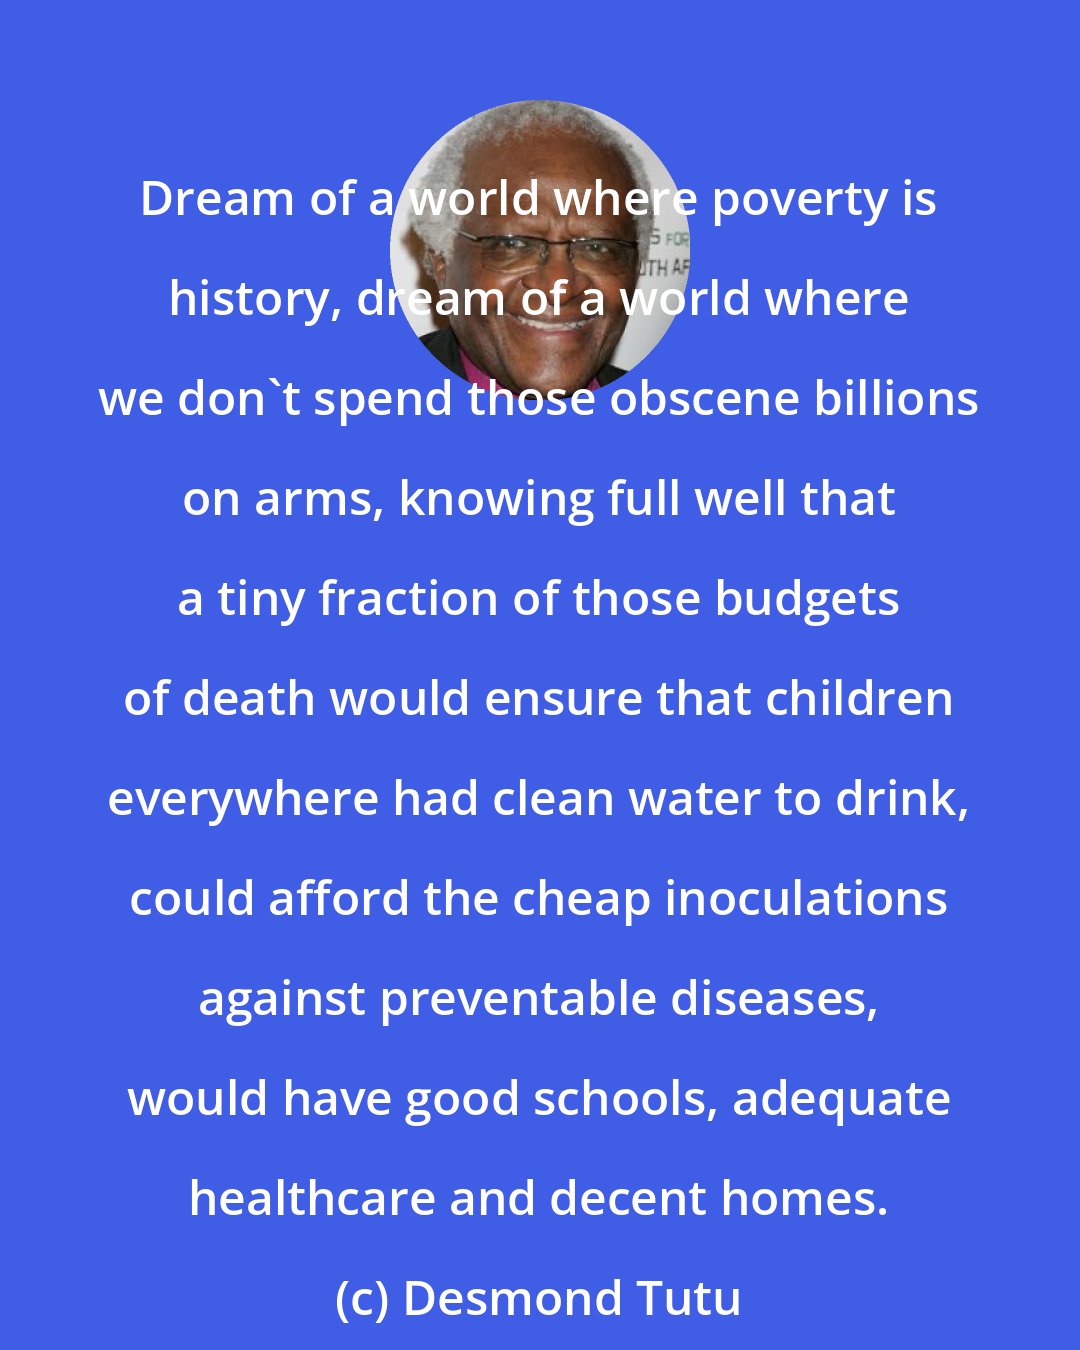 Desmond Tutu: Dream of a world where poverty is history, dream of a world where we don't spend those obscene billions on arms, knowing full well that a tiny fraction of those budgets of death would ensure that children everywhere had clean water to drink, could afford the cheap inoculations against preventable diseases, would have good schools, adequate healthcare and decent homes.